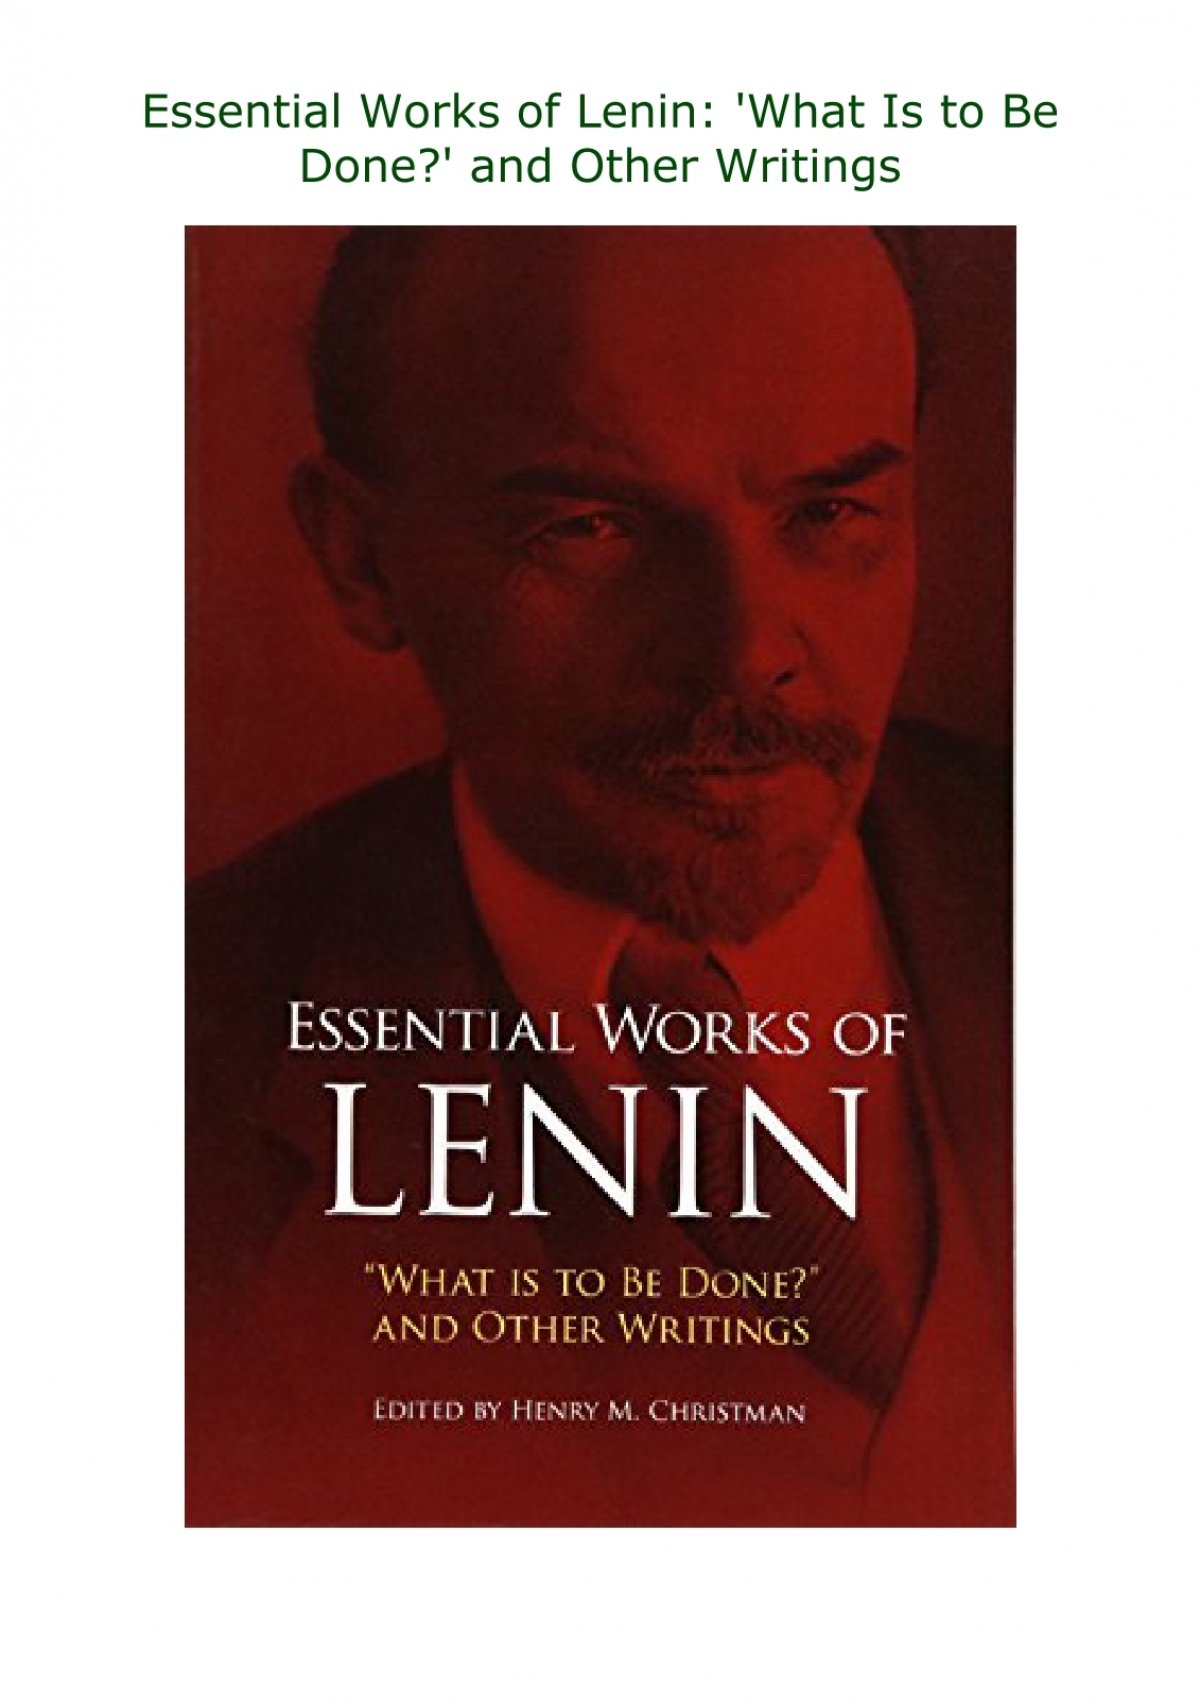 lenin and philosophy and other essays pdf